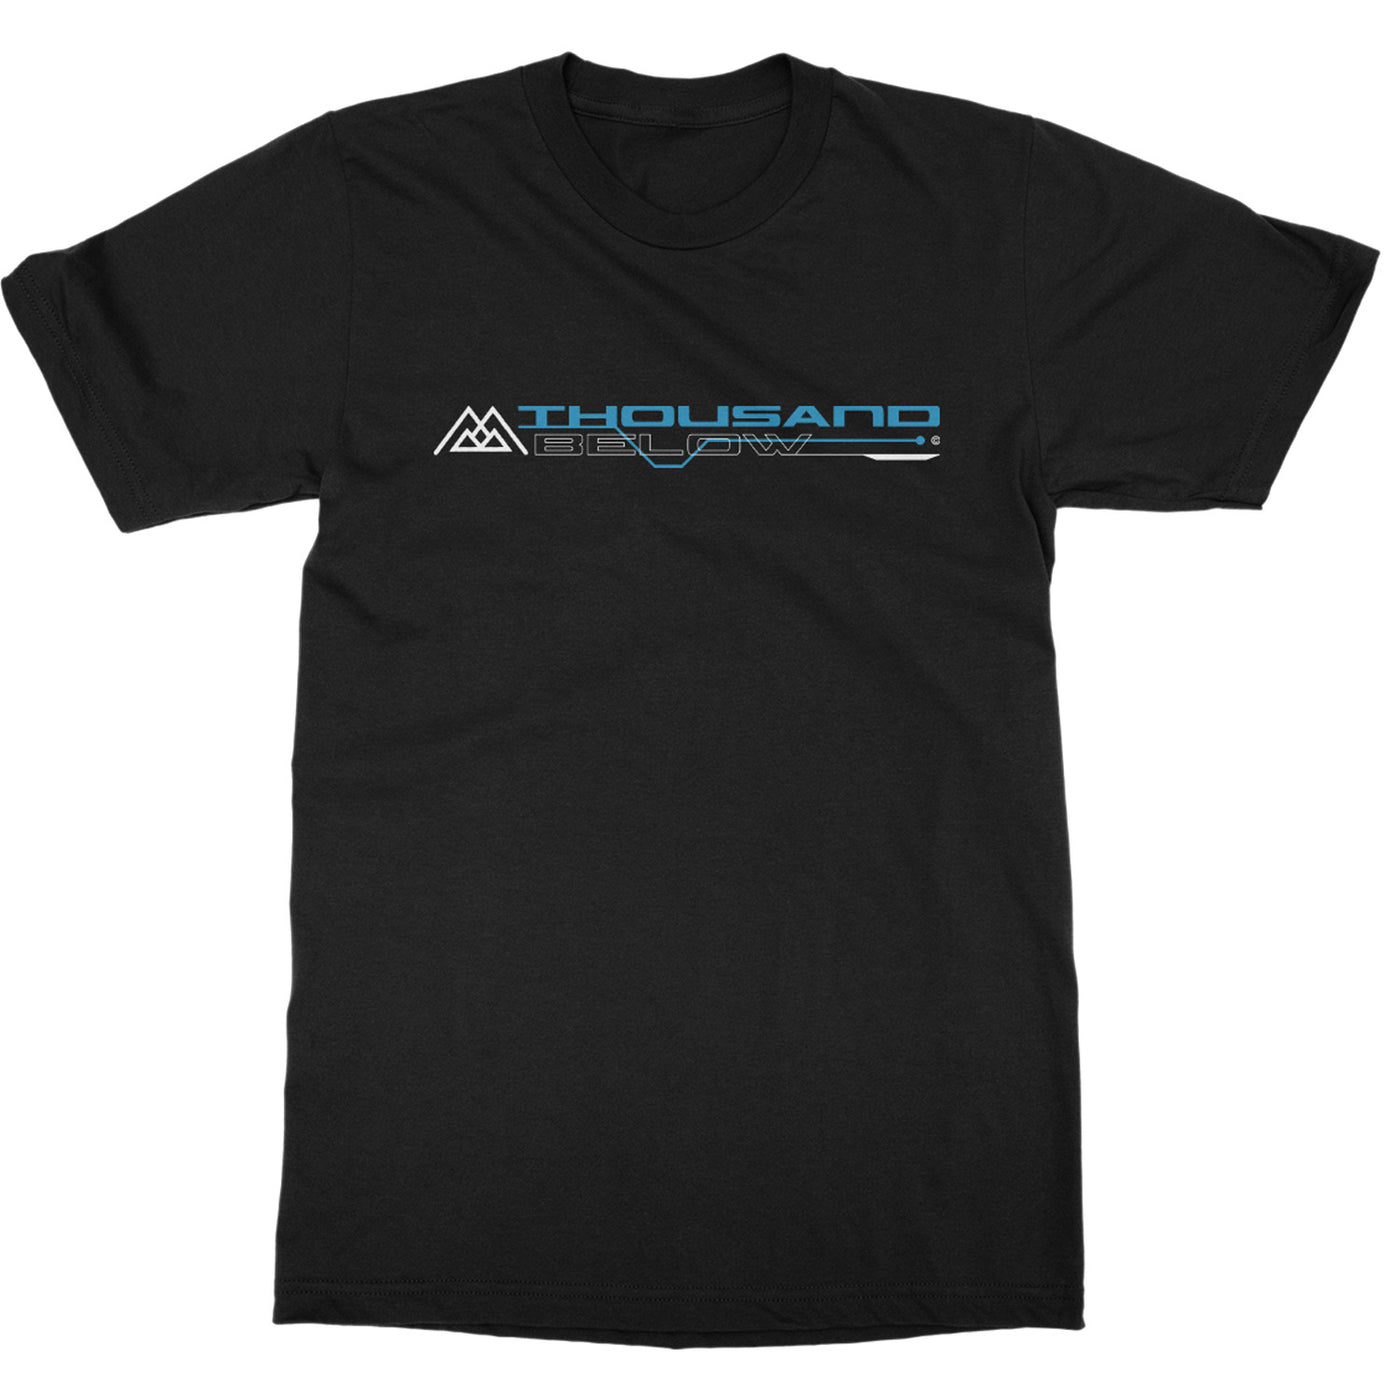 front of black t-shirt with cyber punk lines over the text "thousand below"